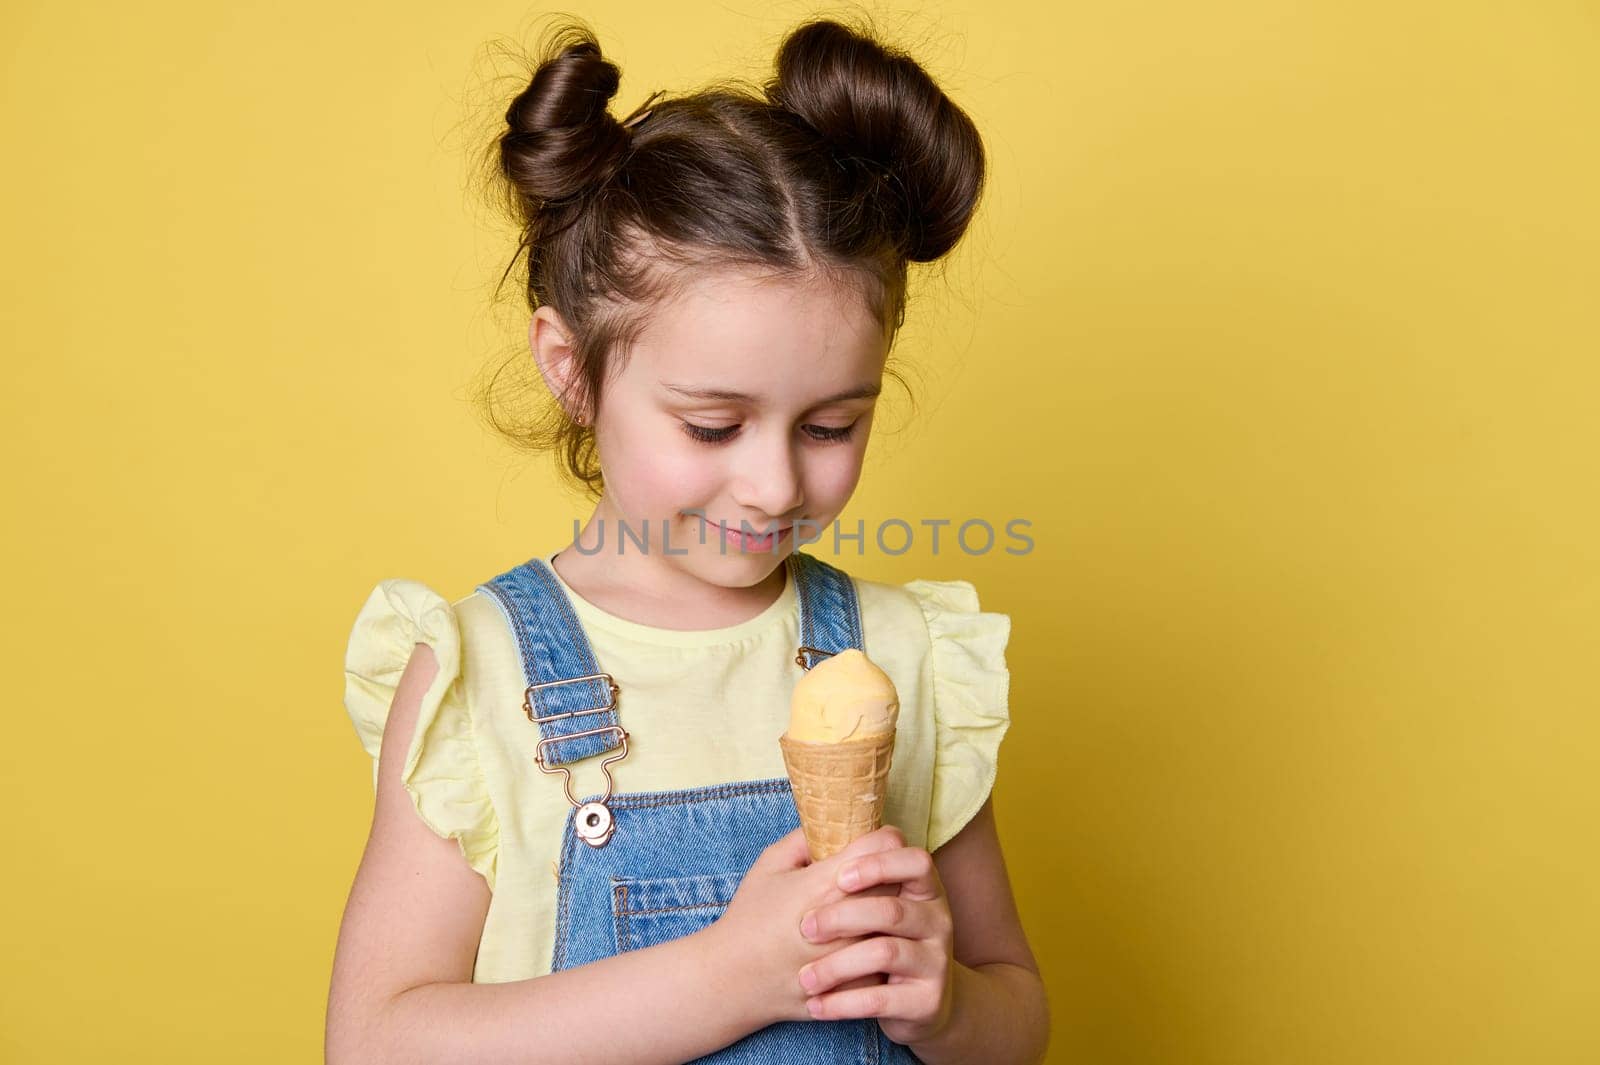 Happy little girl enjoying sweet summer dessert, holding waffle cone with ice cream scoop, isolated on yellow background by artgf